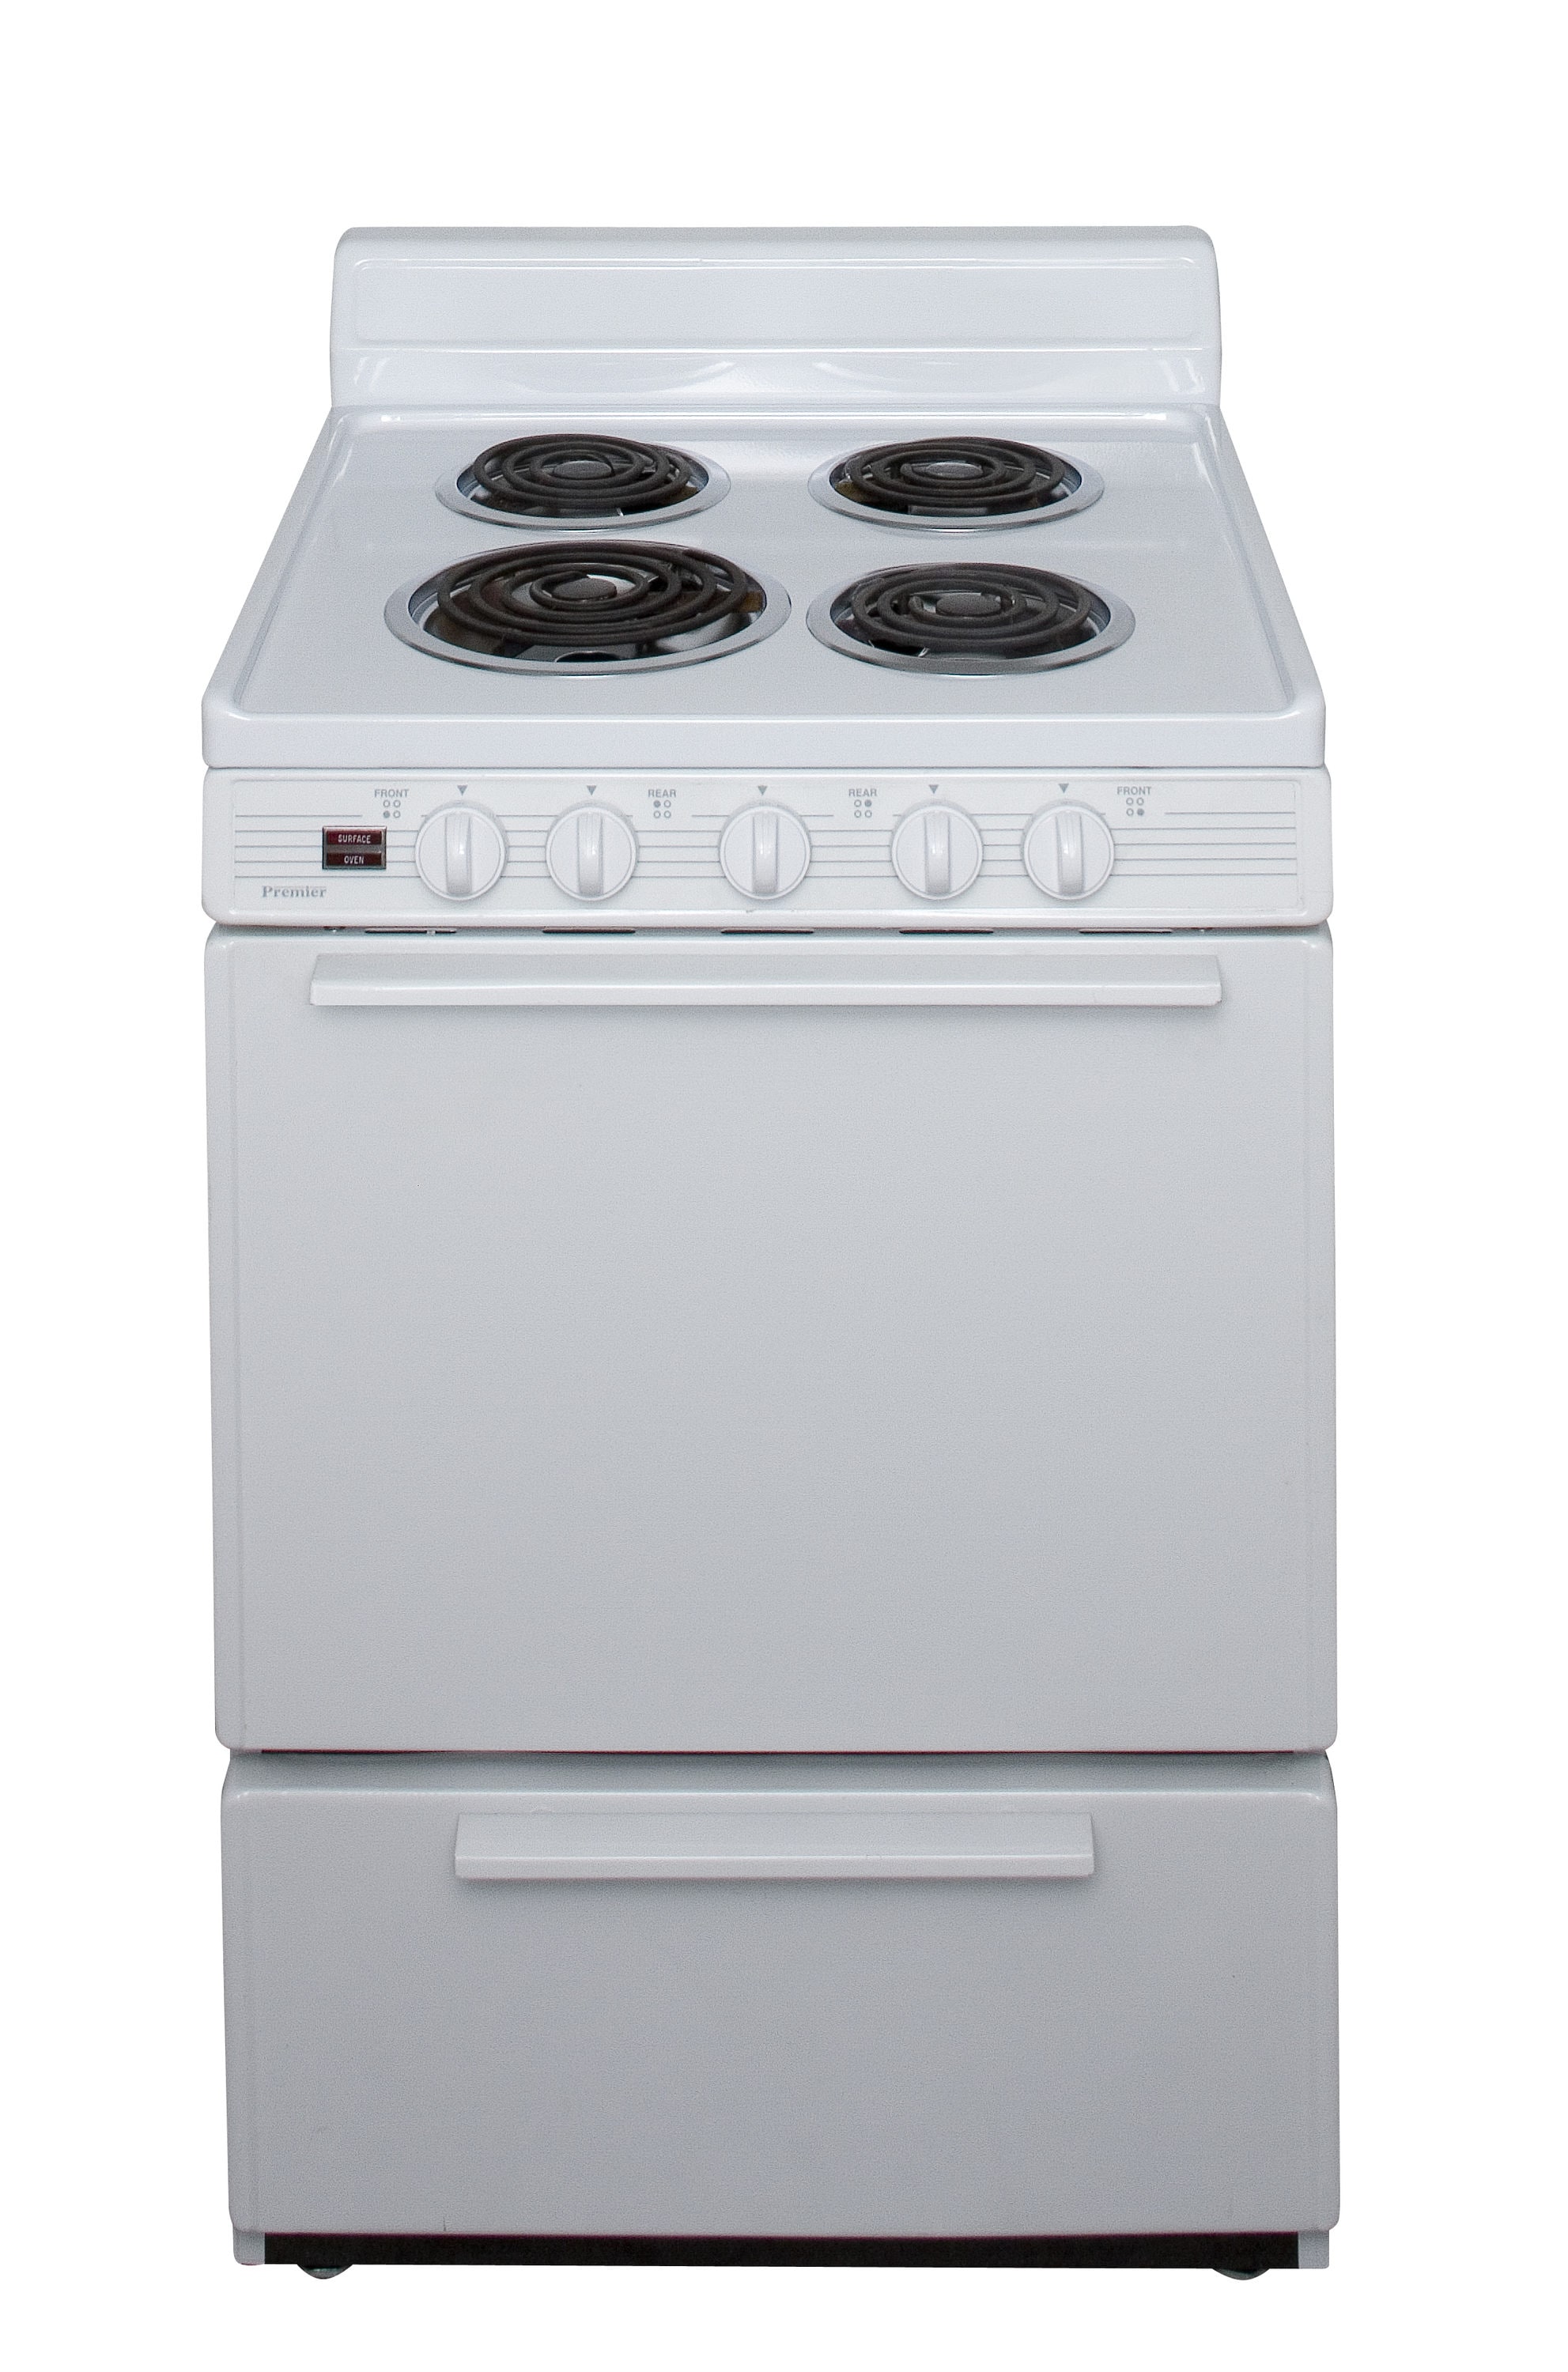 Hotpoint 24 Freestanding Electric Range with 4 Coil Burners, 2.9 Cu. Ft.  Single Oven - White